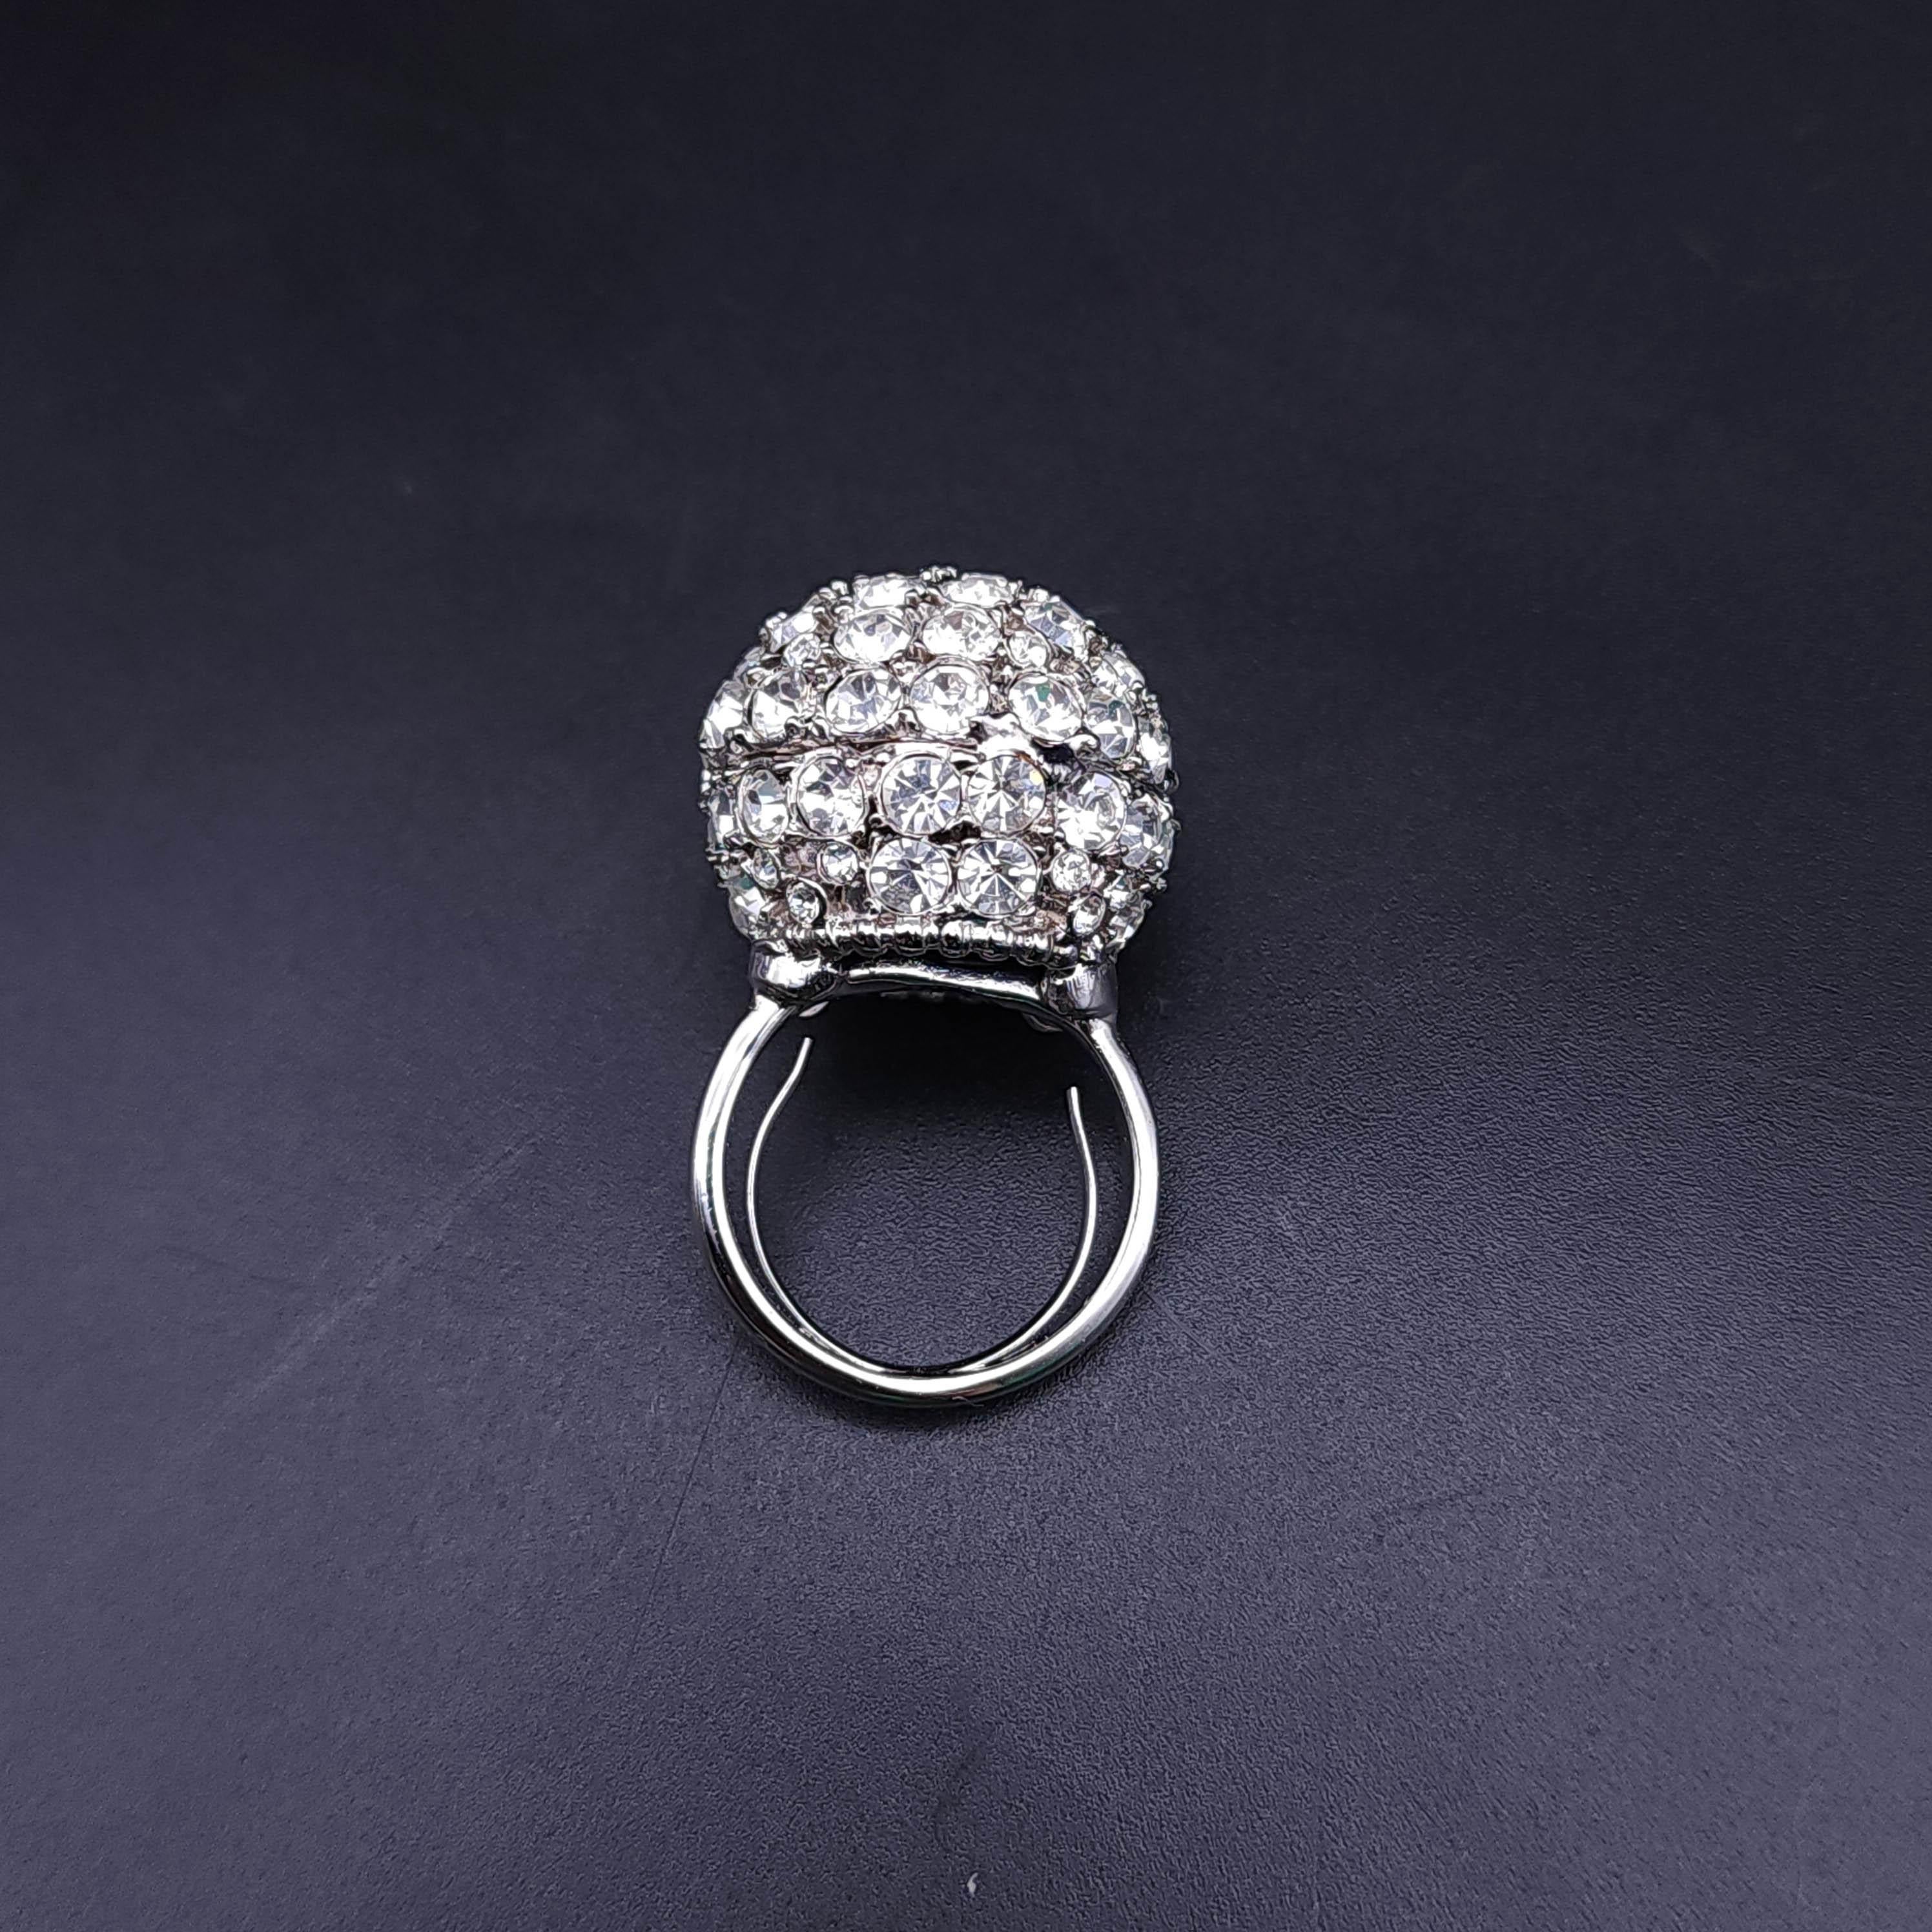 Retro Kenneth J Lane KJL Pave Crystal Disco Ball Cocktail Ring, Silver Tone Sz 4-8 For Sale